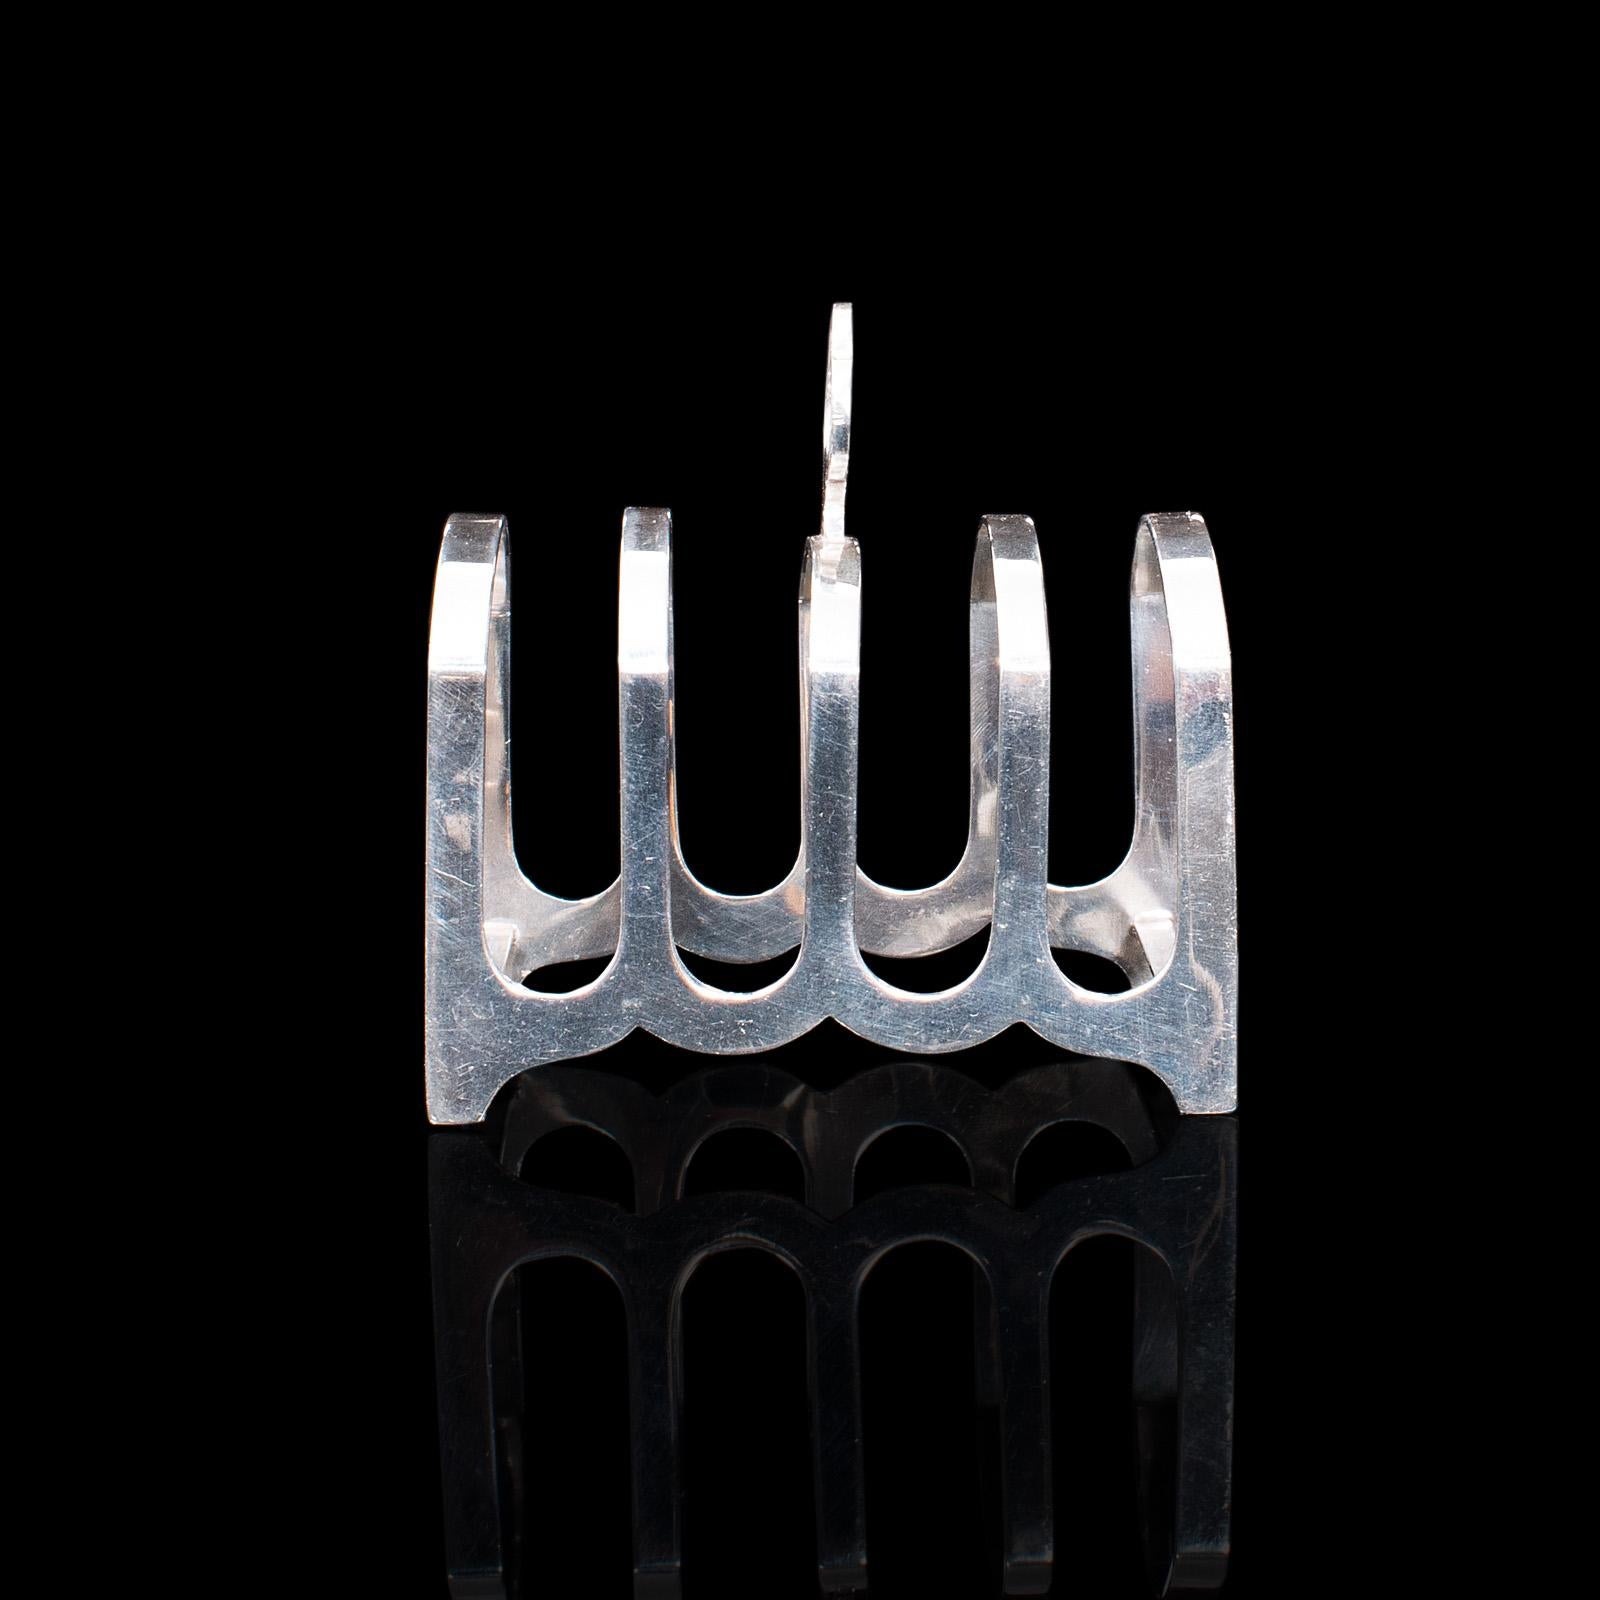 This is a small vintage toast rack. An English, silver, hallmarked breakfast holder, dating to the mid 20th century, 1938.

Appealing, hallmarked silver toast rack
Displays a desirable aged patina throughout
Silver in good order, with bright